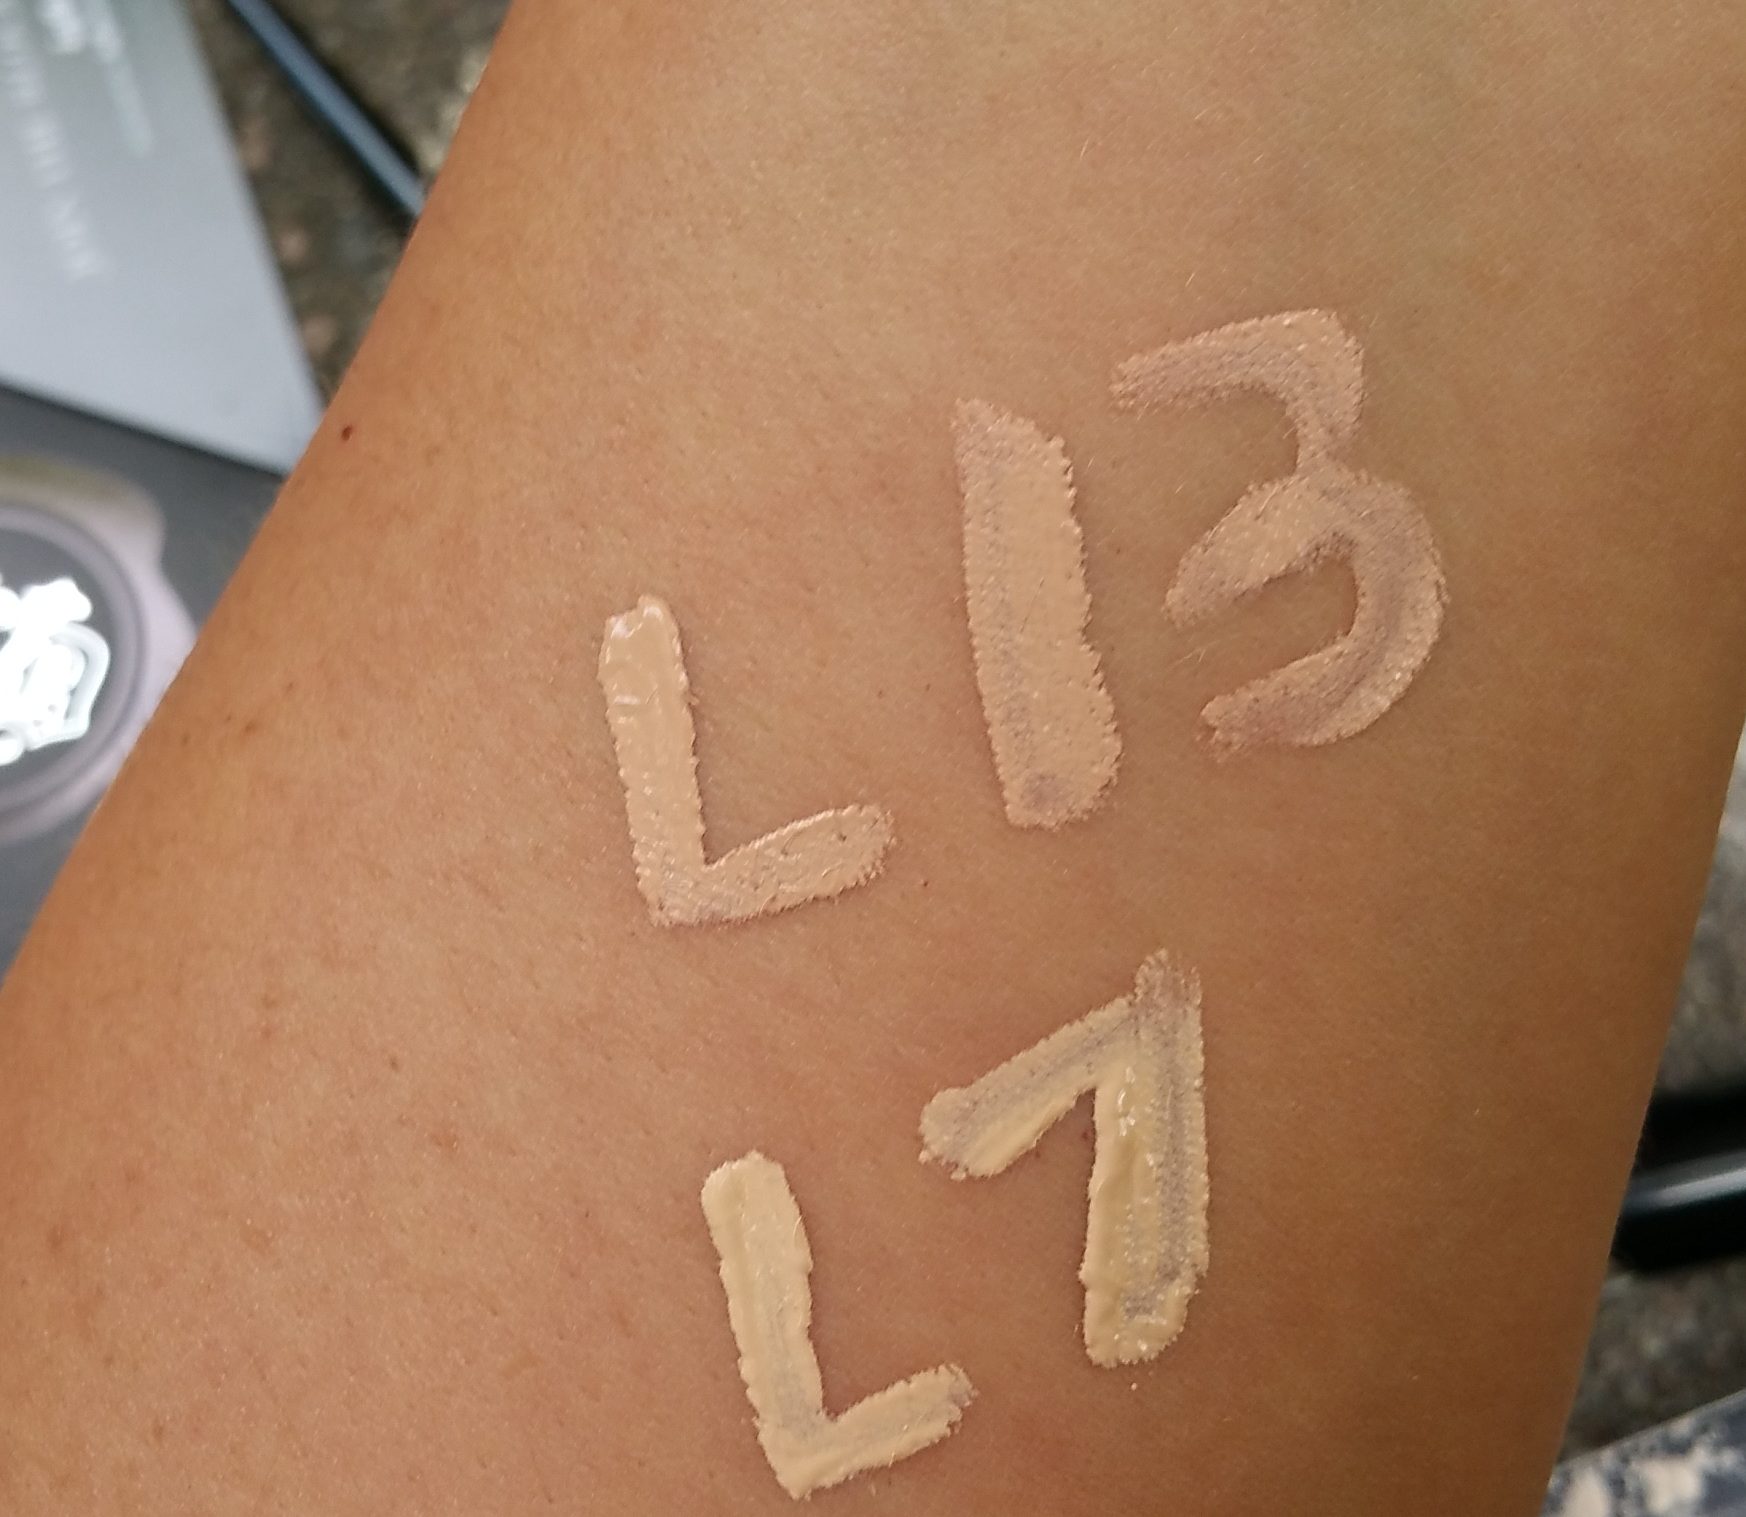 Kat Von D Beauty Lock-It Creme Concealers, in shades L13 (Cool) and L7 (Warm), left to right.